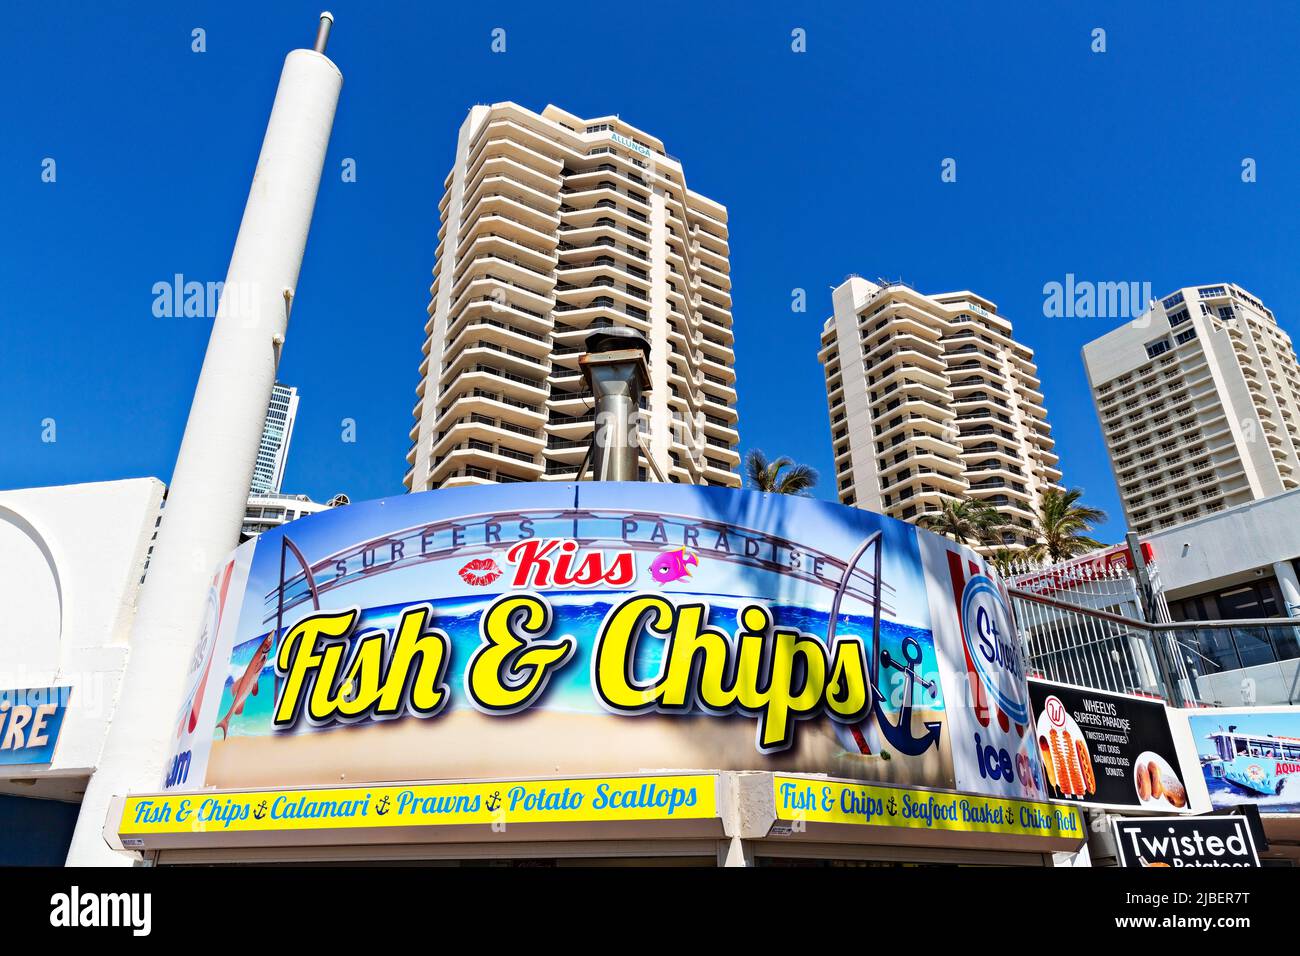 Queensland Australia /  Holiday apartments tower above a Fish & Chips eatery at Surfers Paradise. Stock Photo